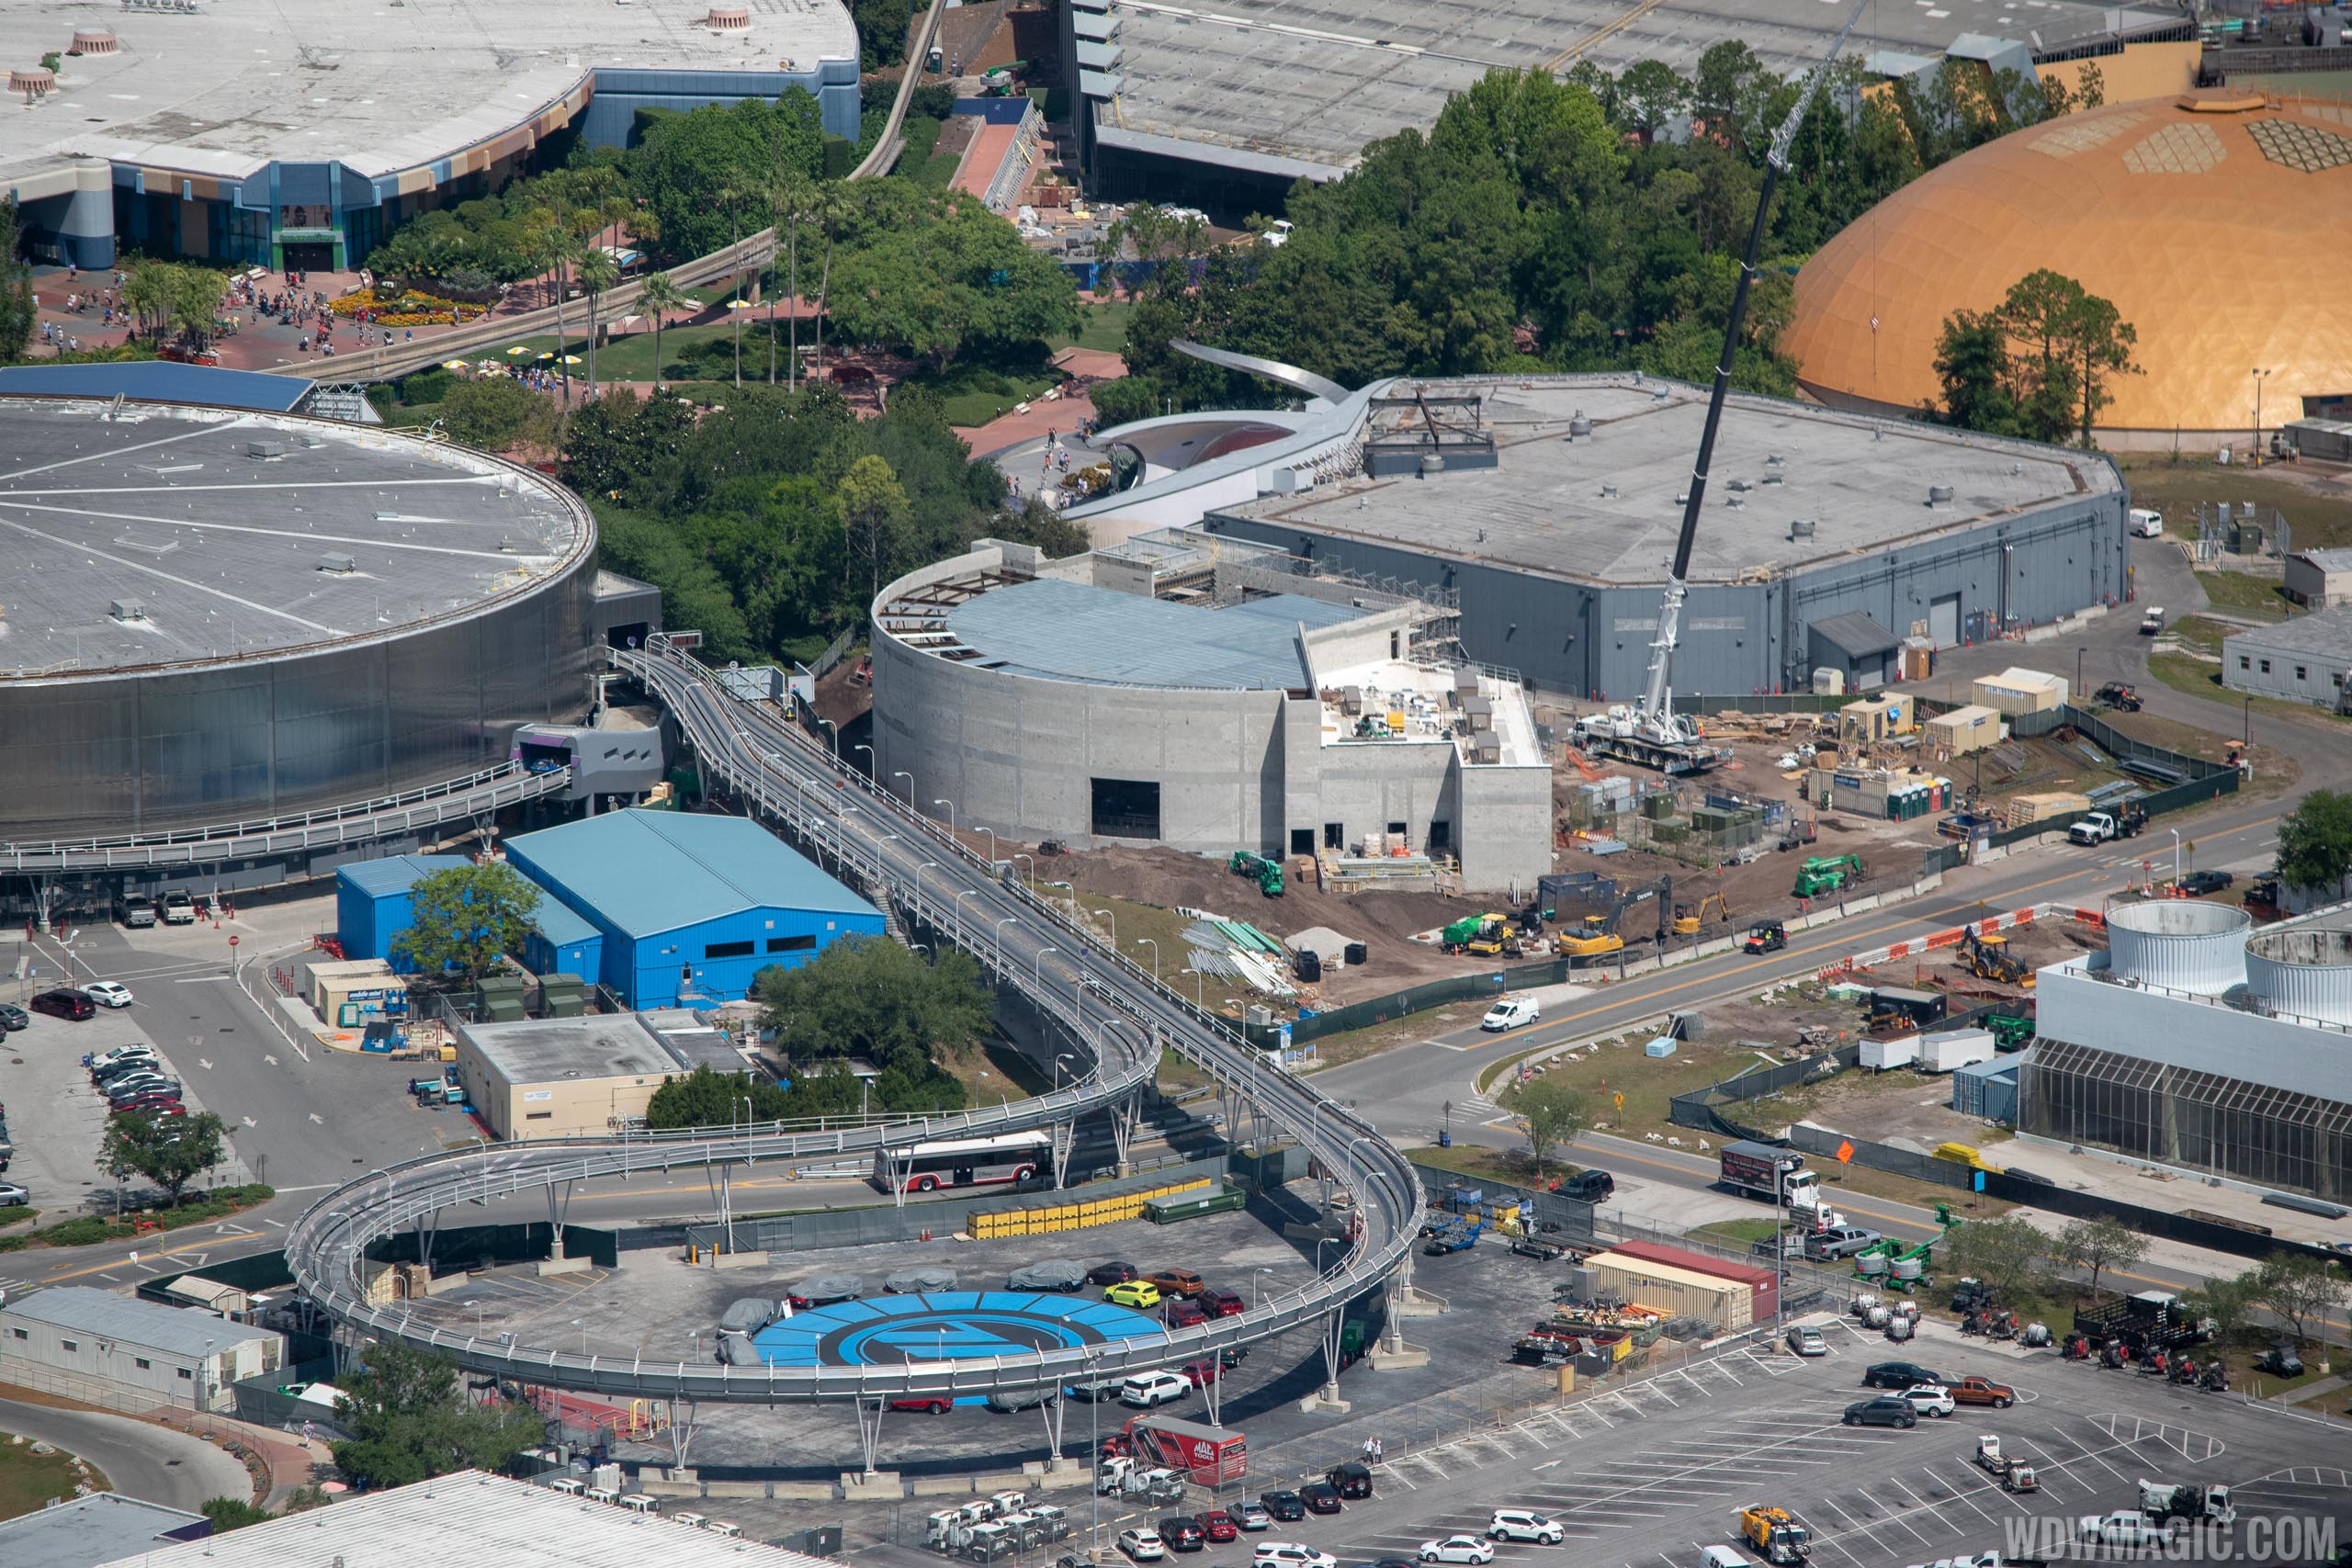 PHOTOS - Epcot's Space-themed restaurant to open later this year